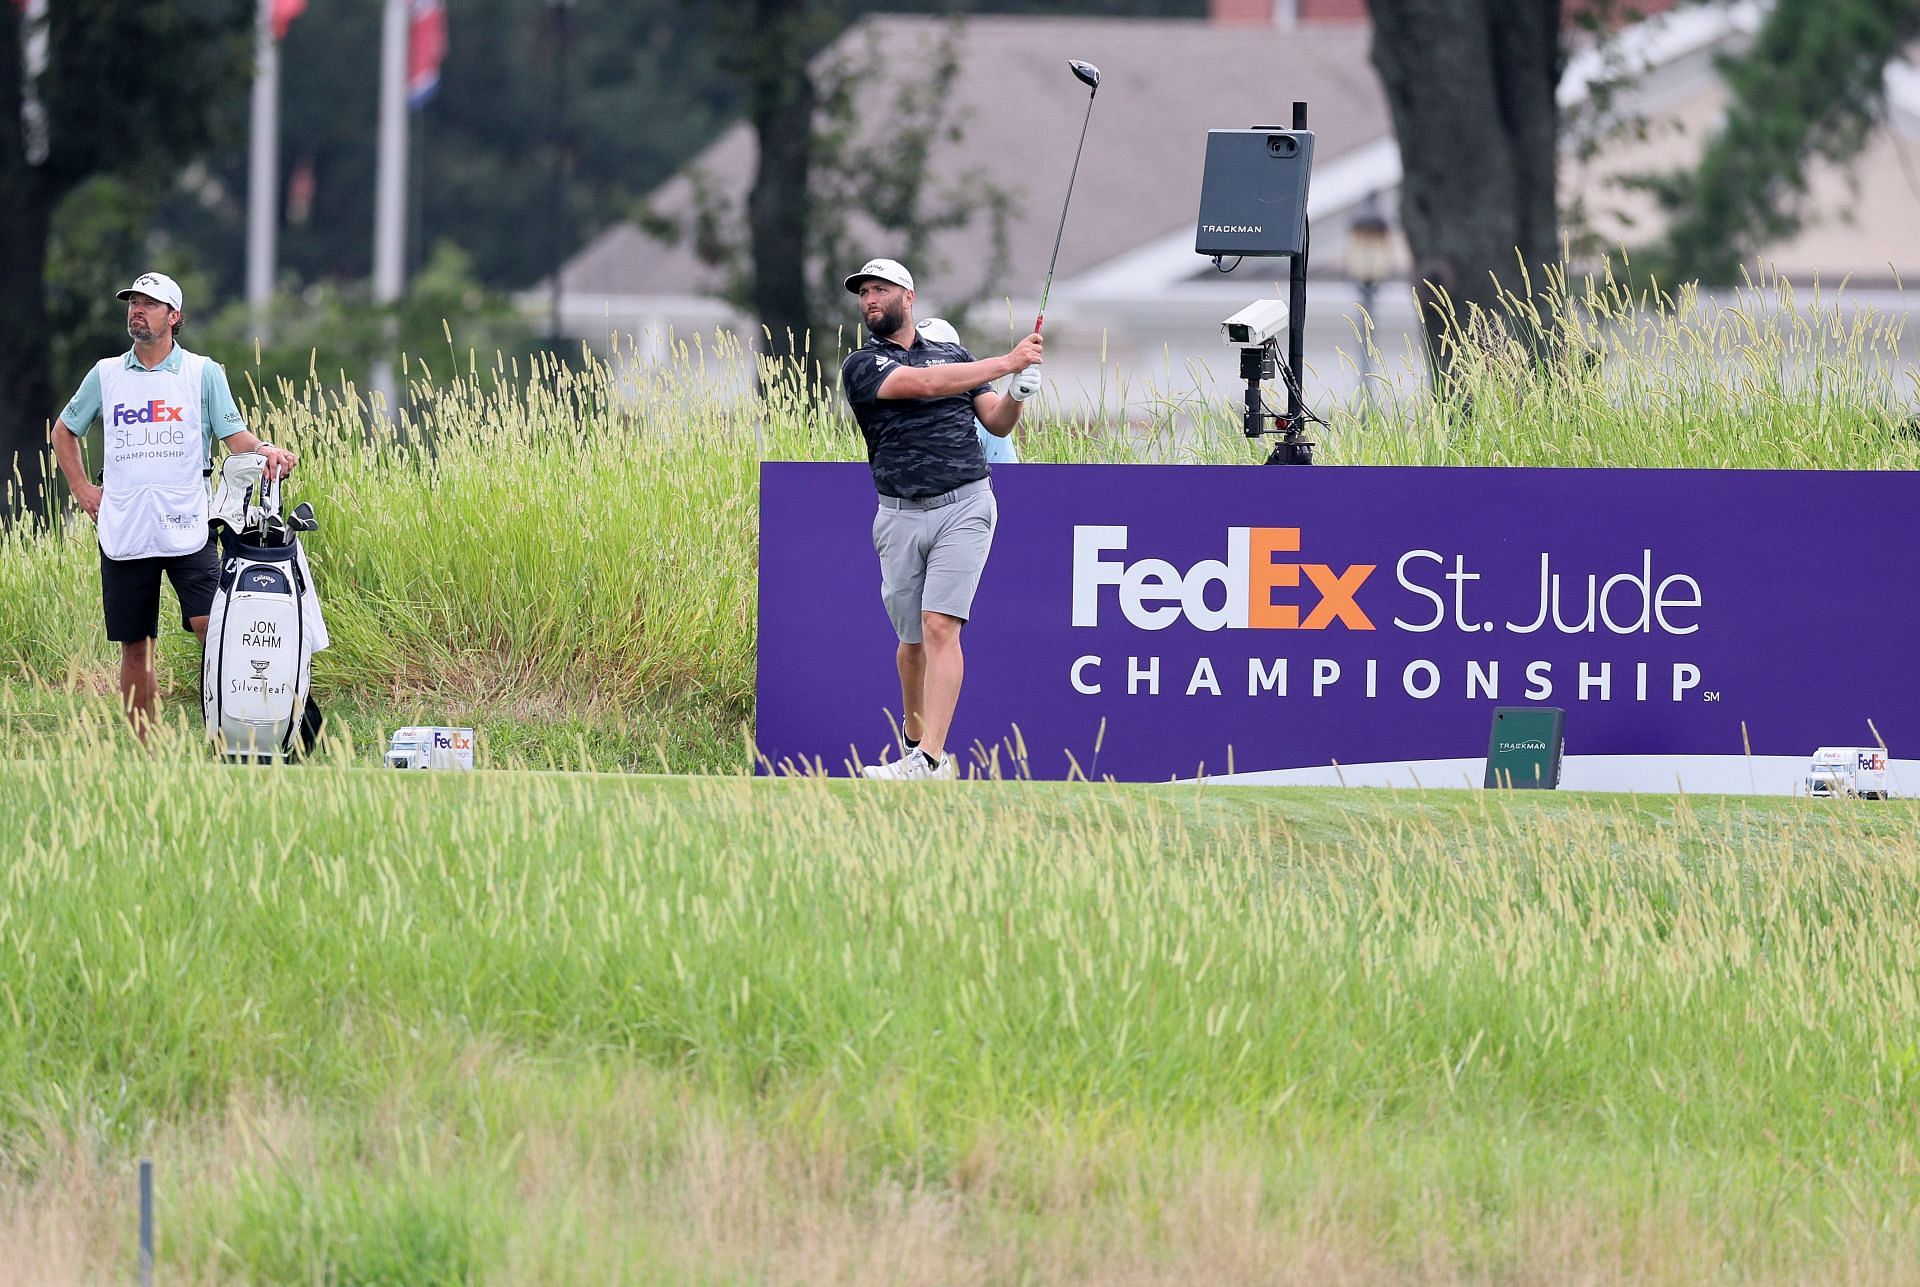 2023 FedEx St. Jude Championship Thursday play delayed due to inclement